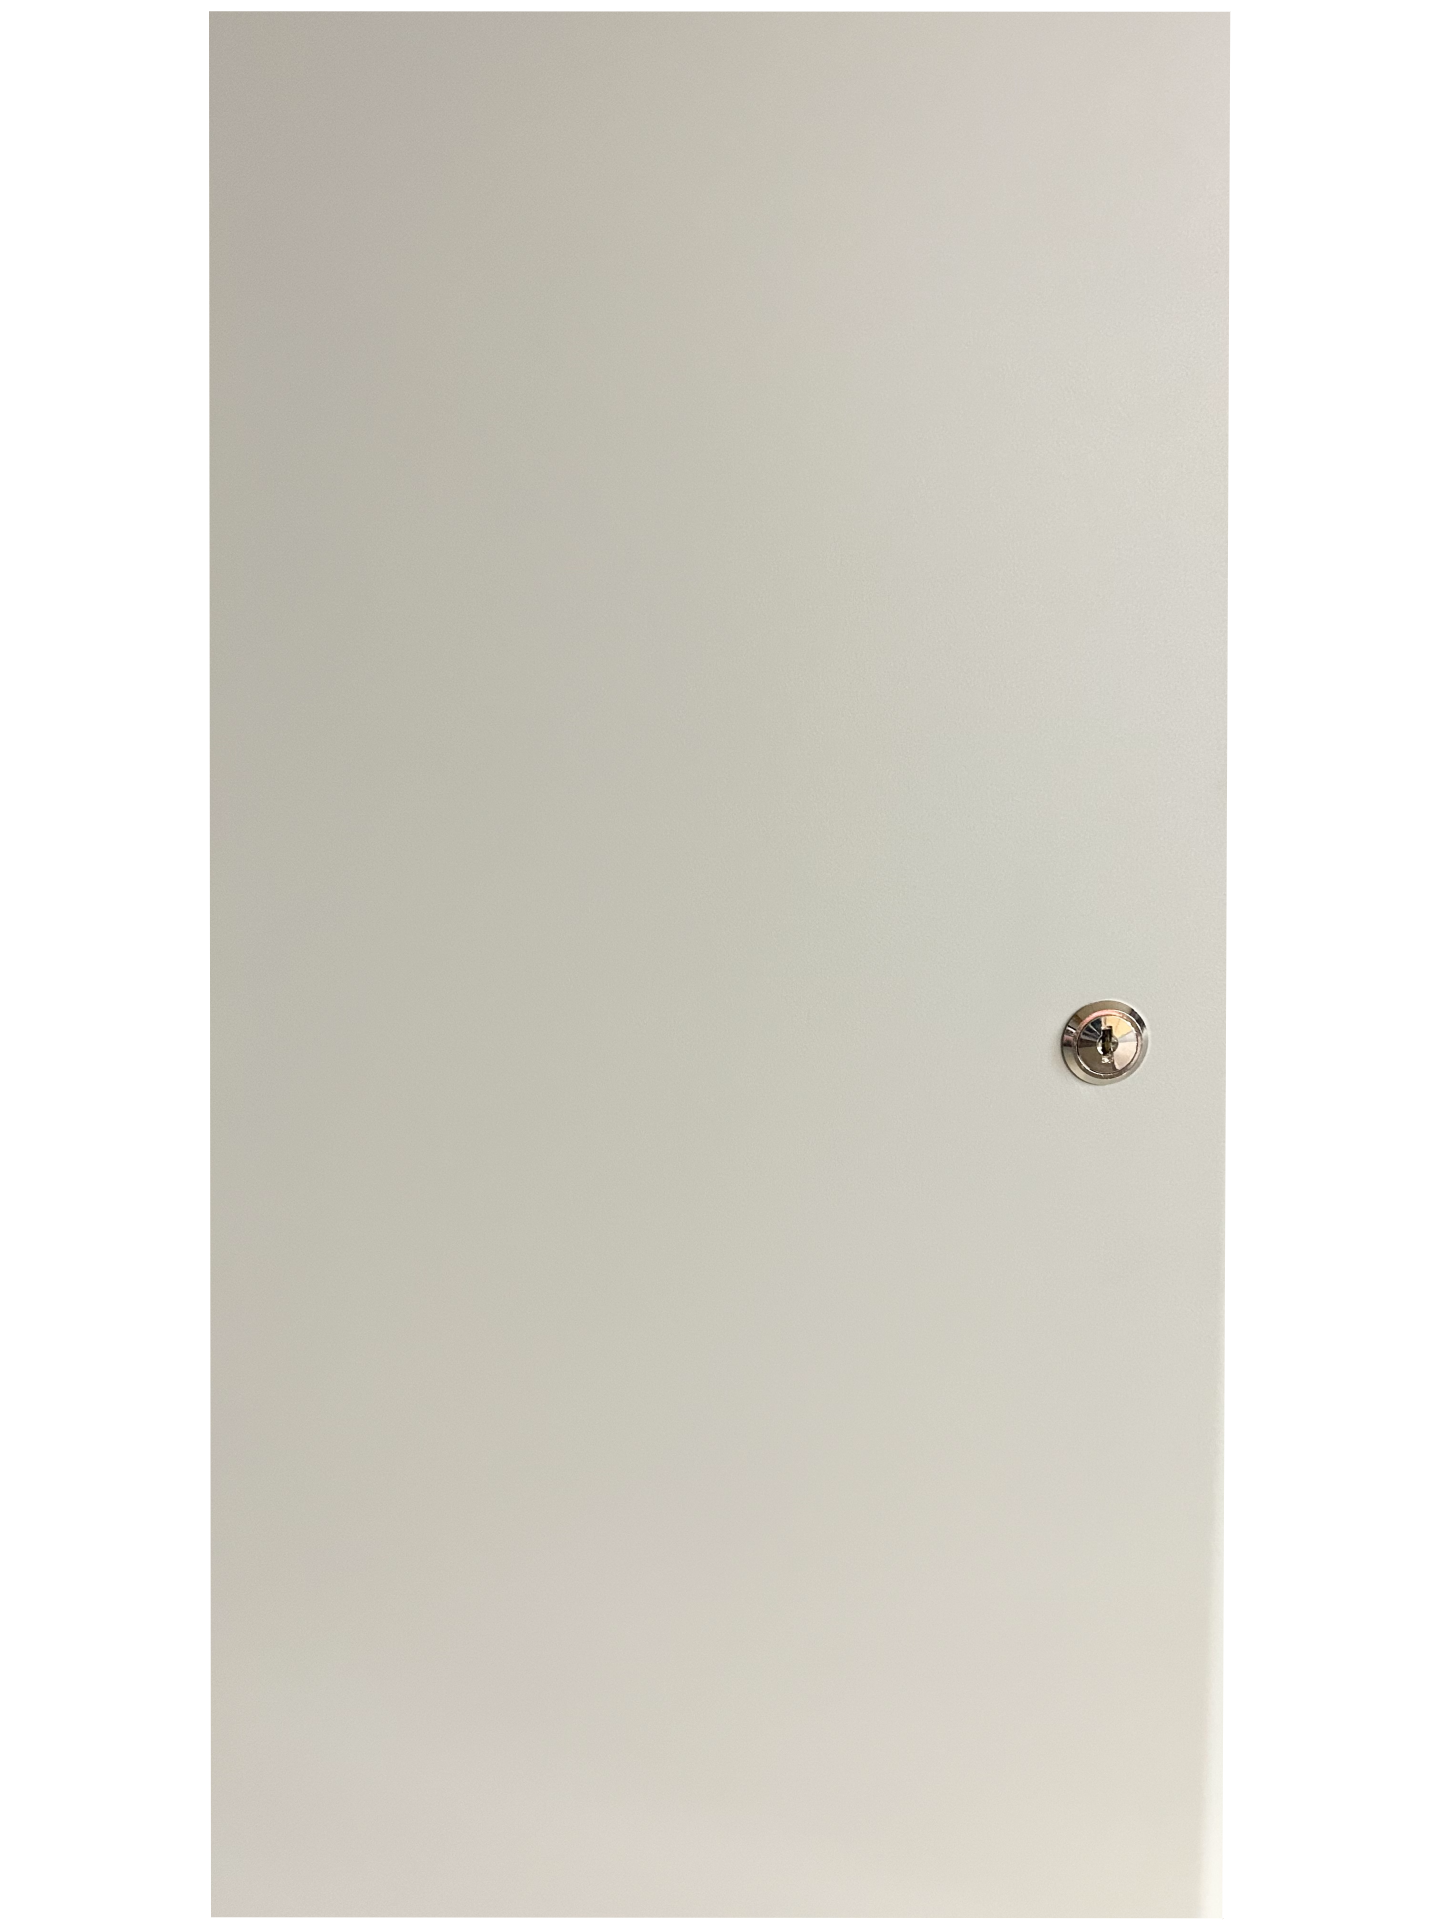 Standard Replacement Cabinet Lock for Regent and Aristocrat Cabinets